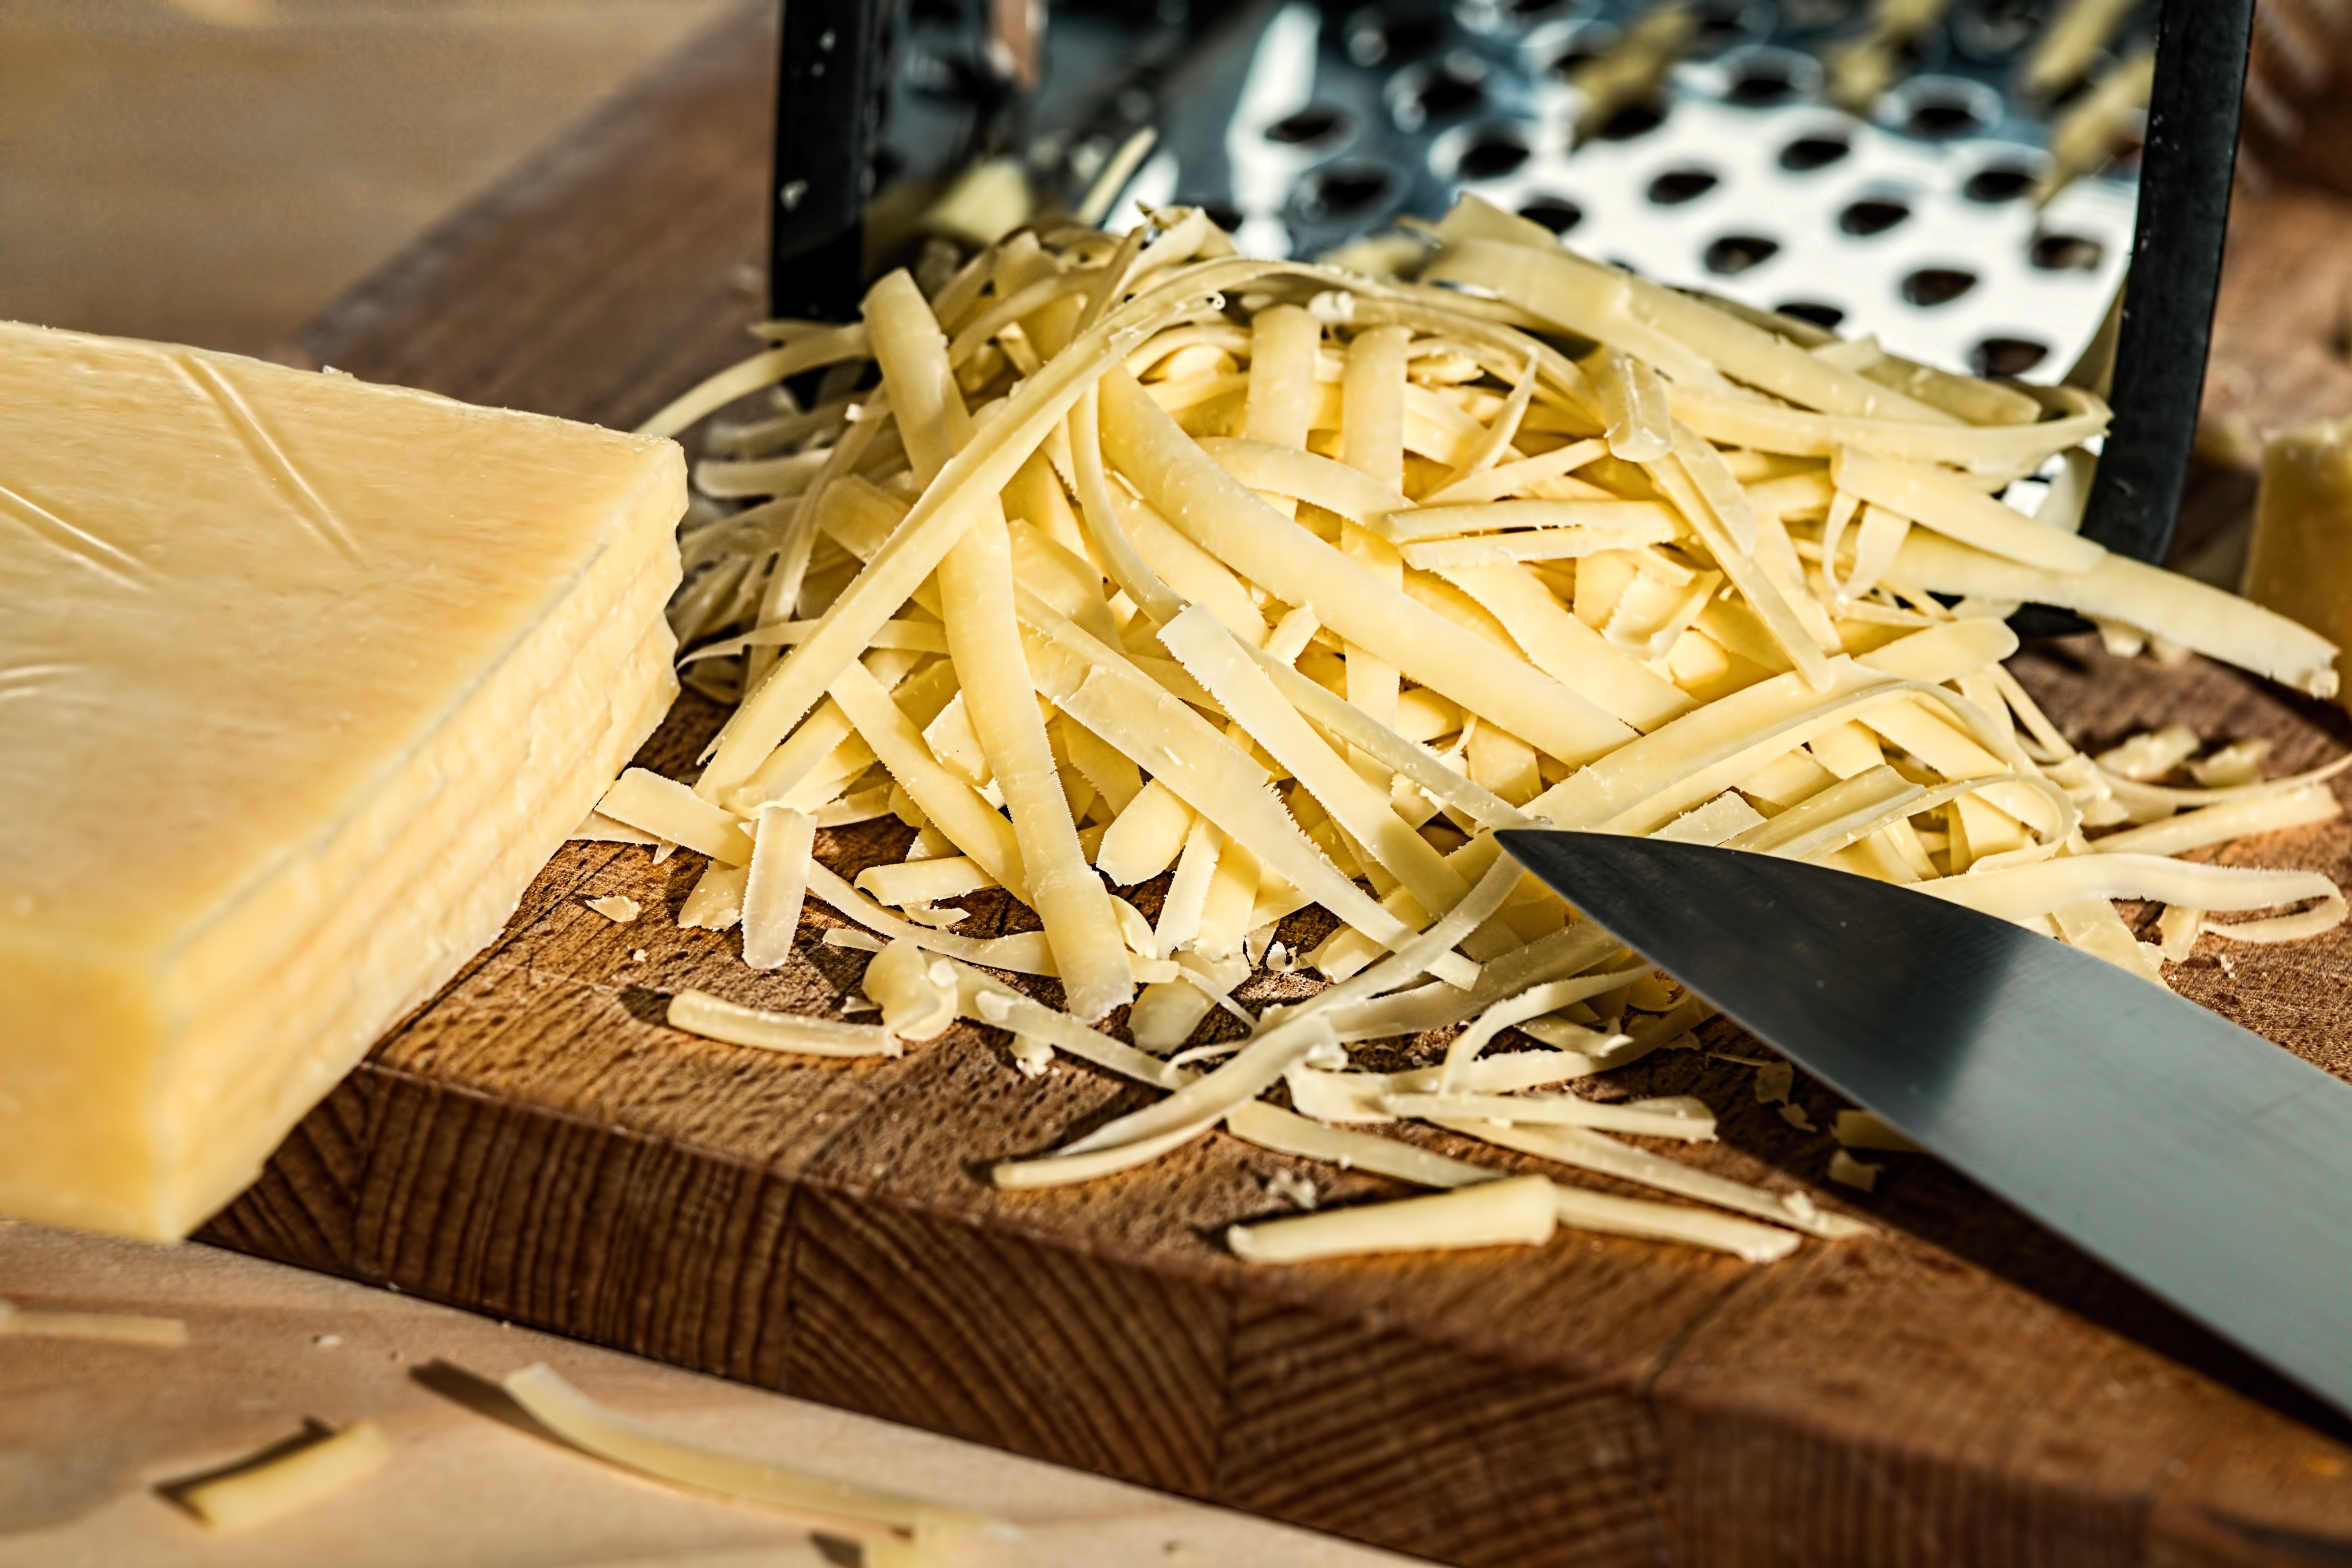 Grater, Grated Cheese, Cheese, italian food, wood - material